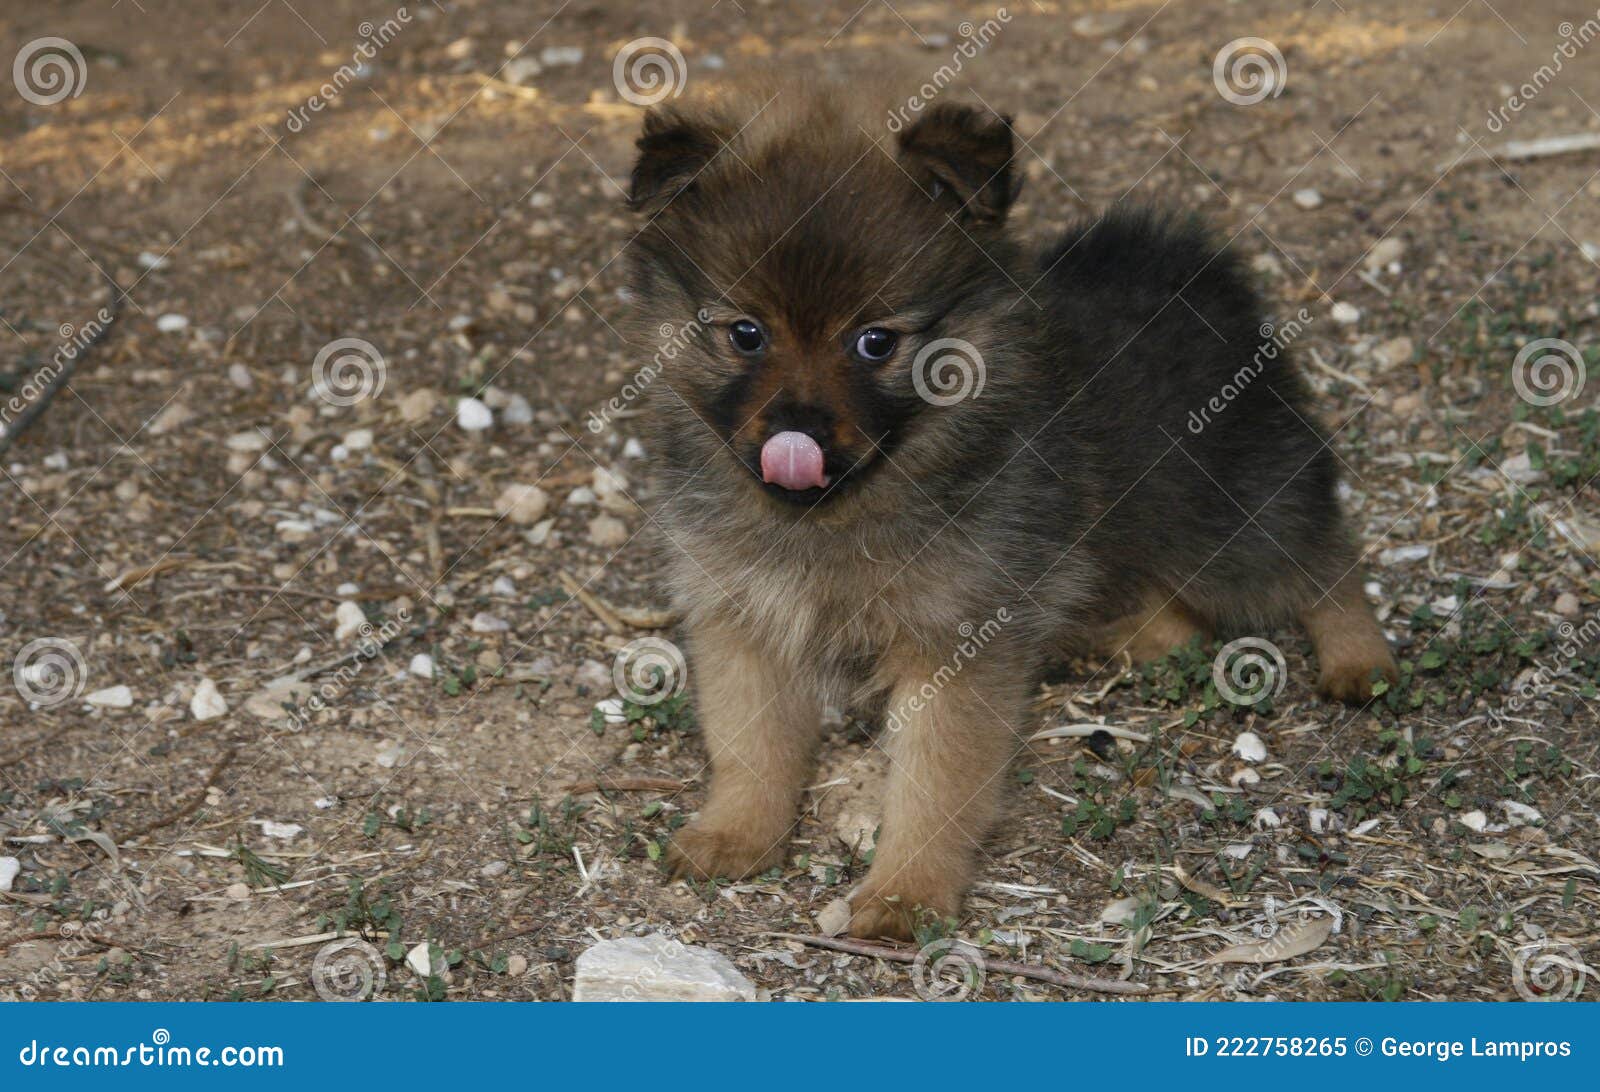 Spitz Puppy Golden Brown 2 Months Old Stock Image Image Of Domestic Caress